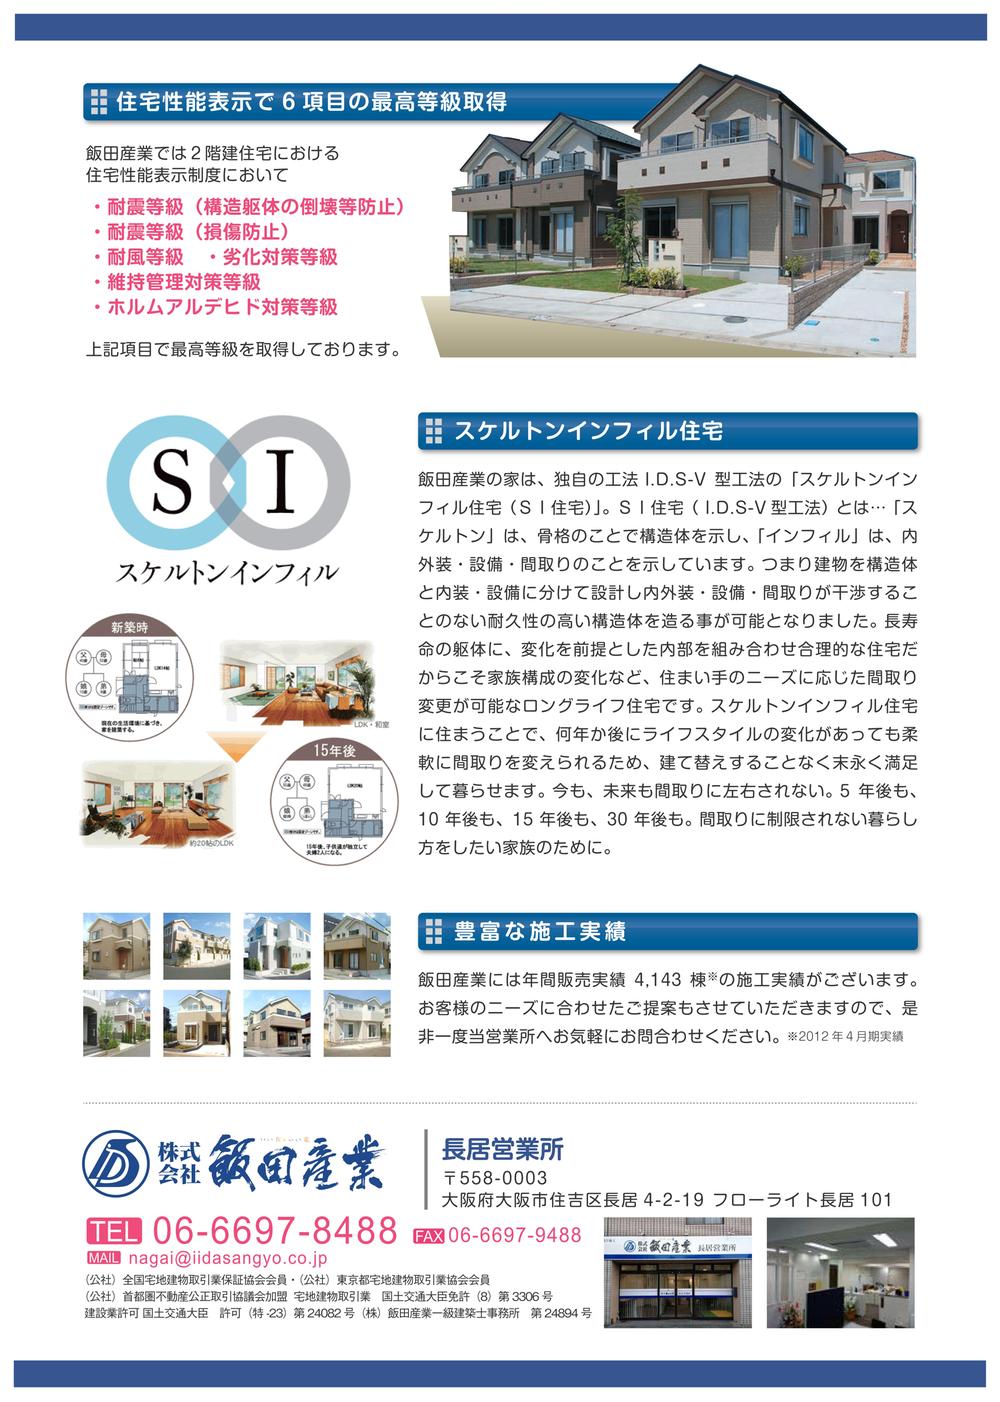 Construction ・ Construction method ・ specification. Seismic grade ・ Wind-resistant grade, etc., We also get a variety of performance evaluation in other! 